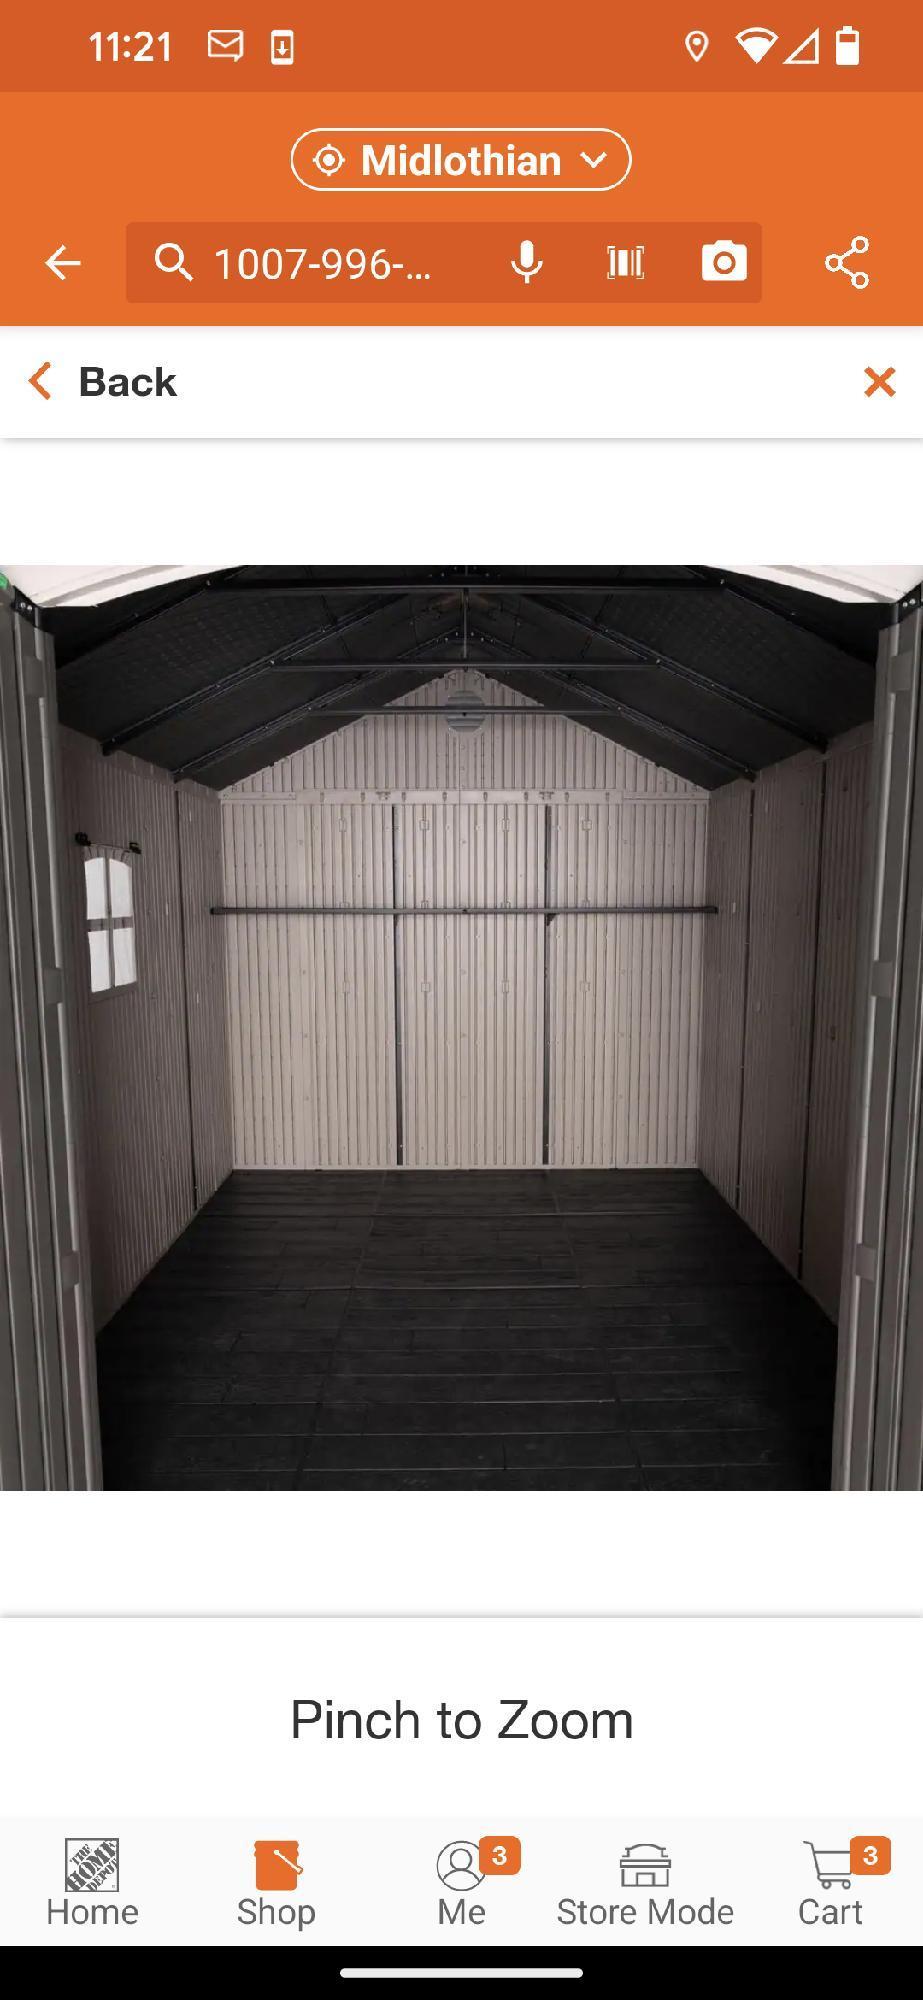 (2 Boxes) Lifetime 8 ft. W x 10 ft. D Resin Outdoor Storage Shed 71.7 sq. ft., Appears to be New in